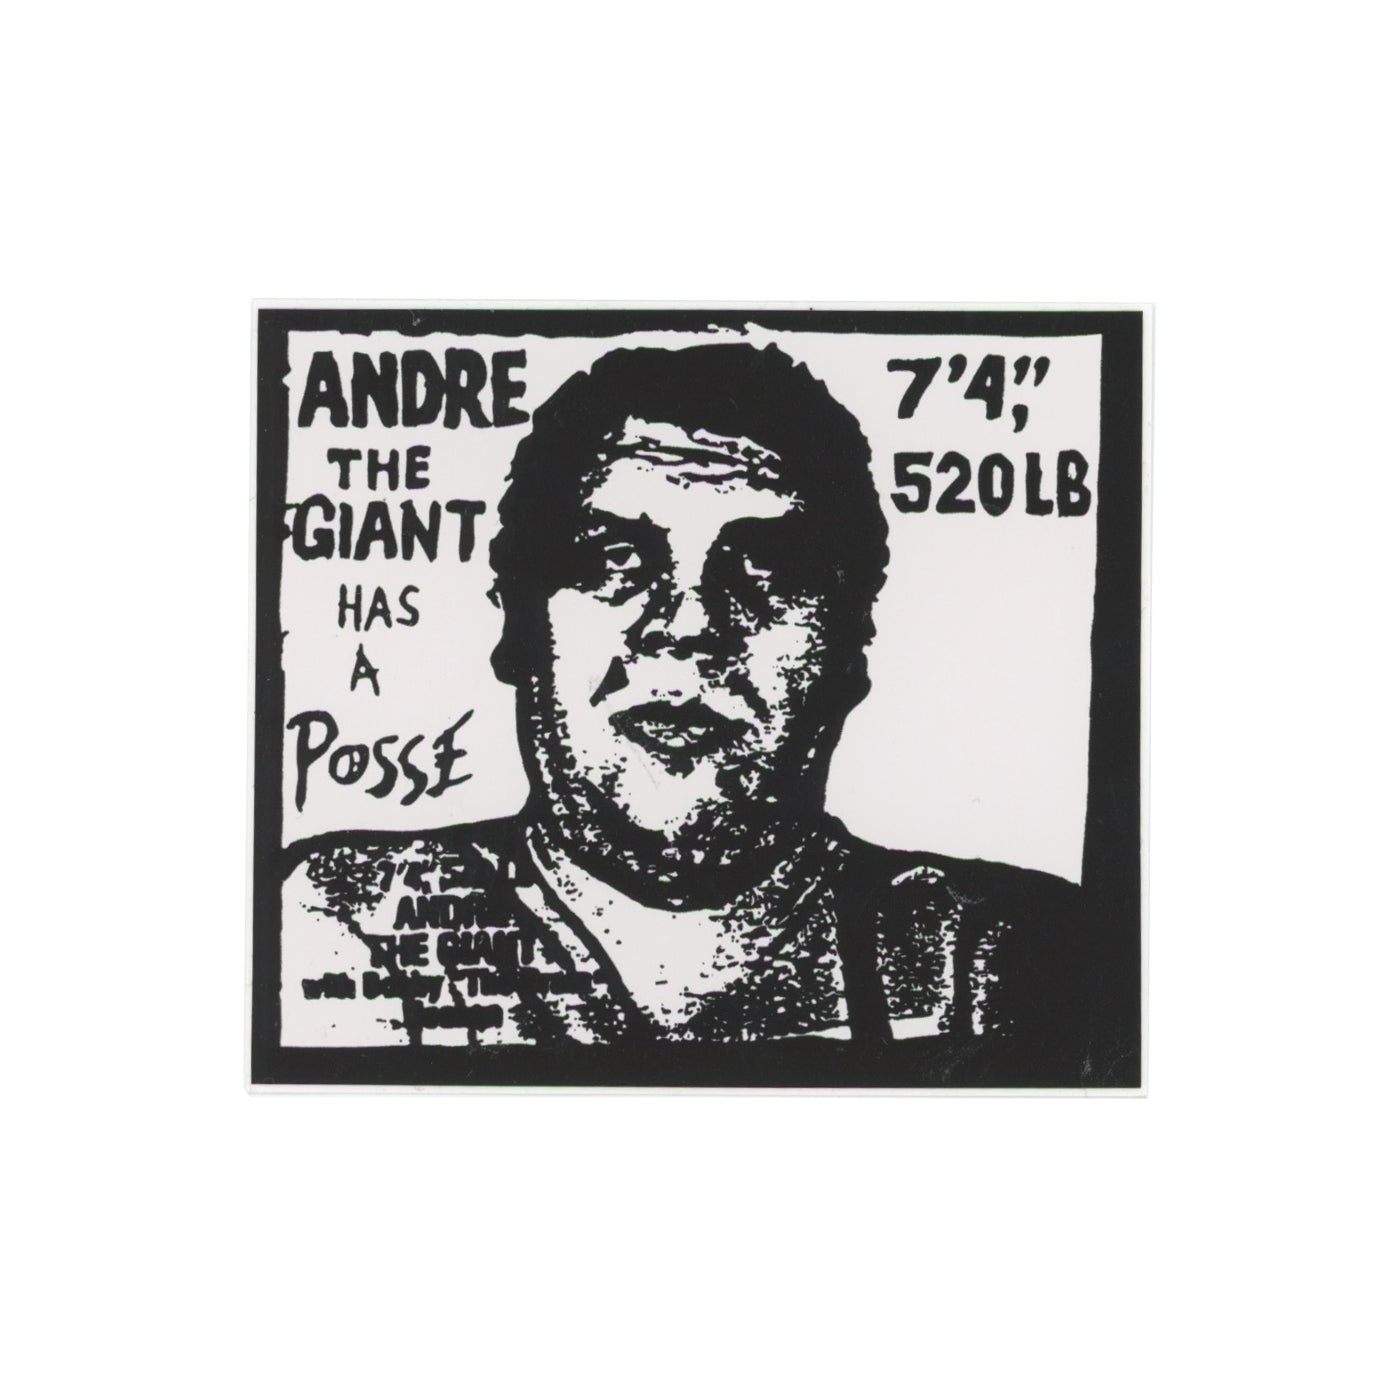 ANDRE THE GIANT HAS A POSSE Black White Sticker